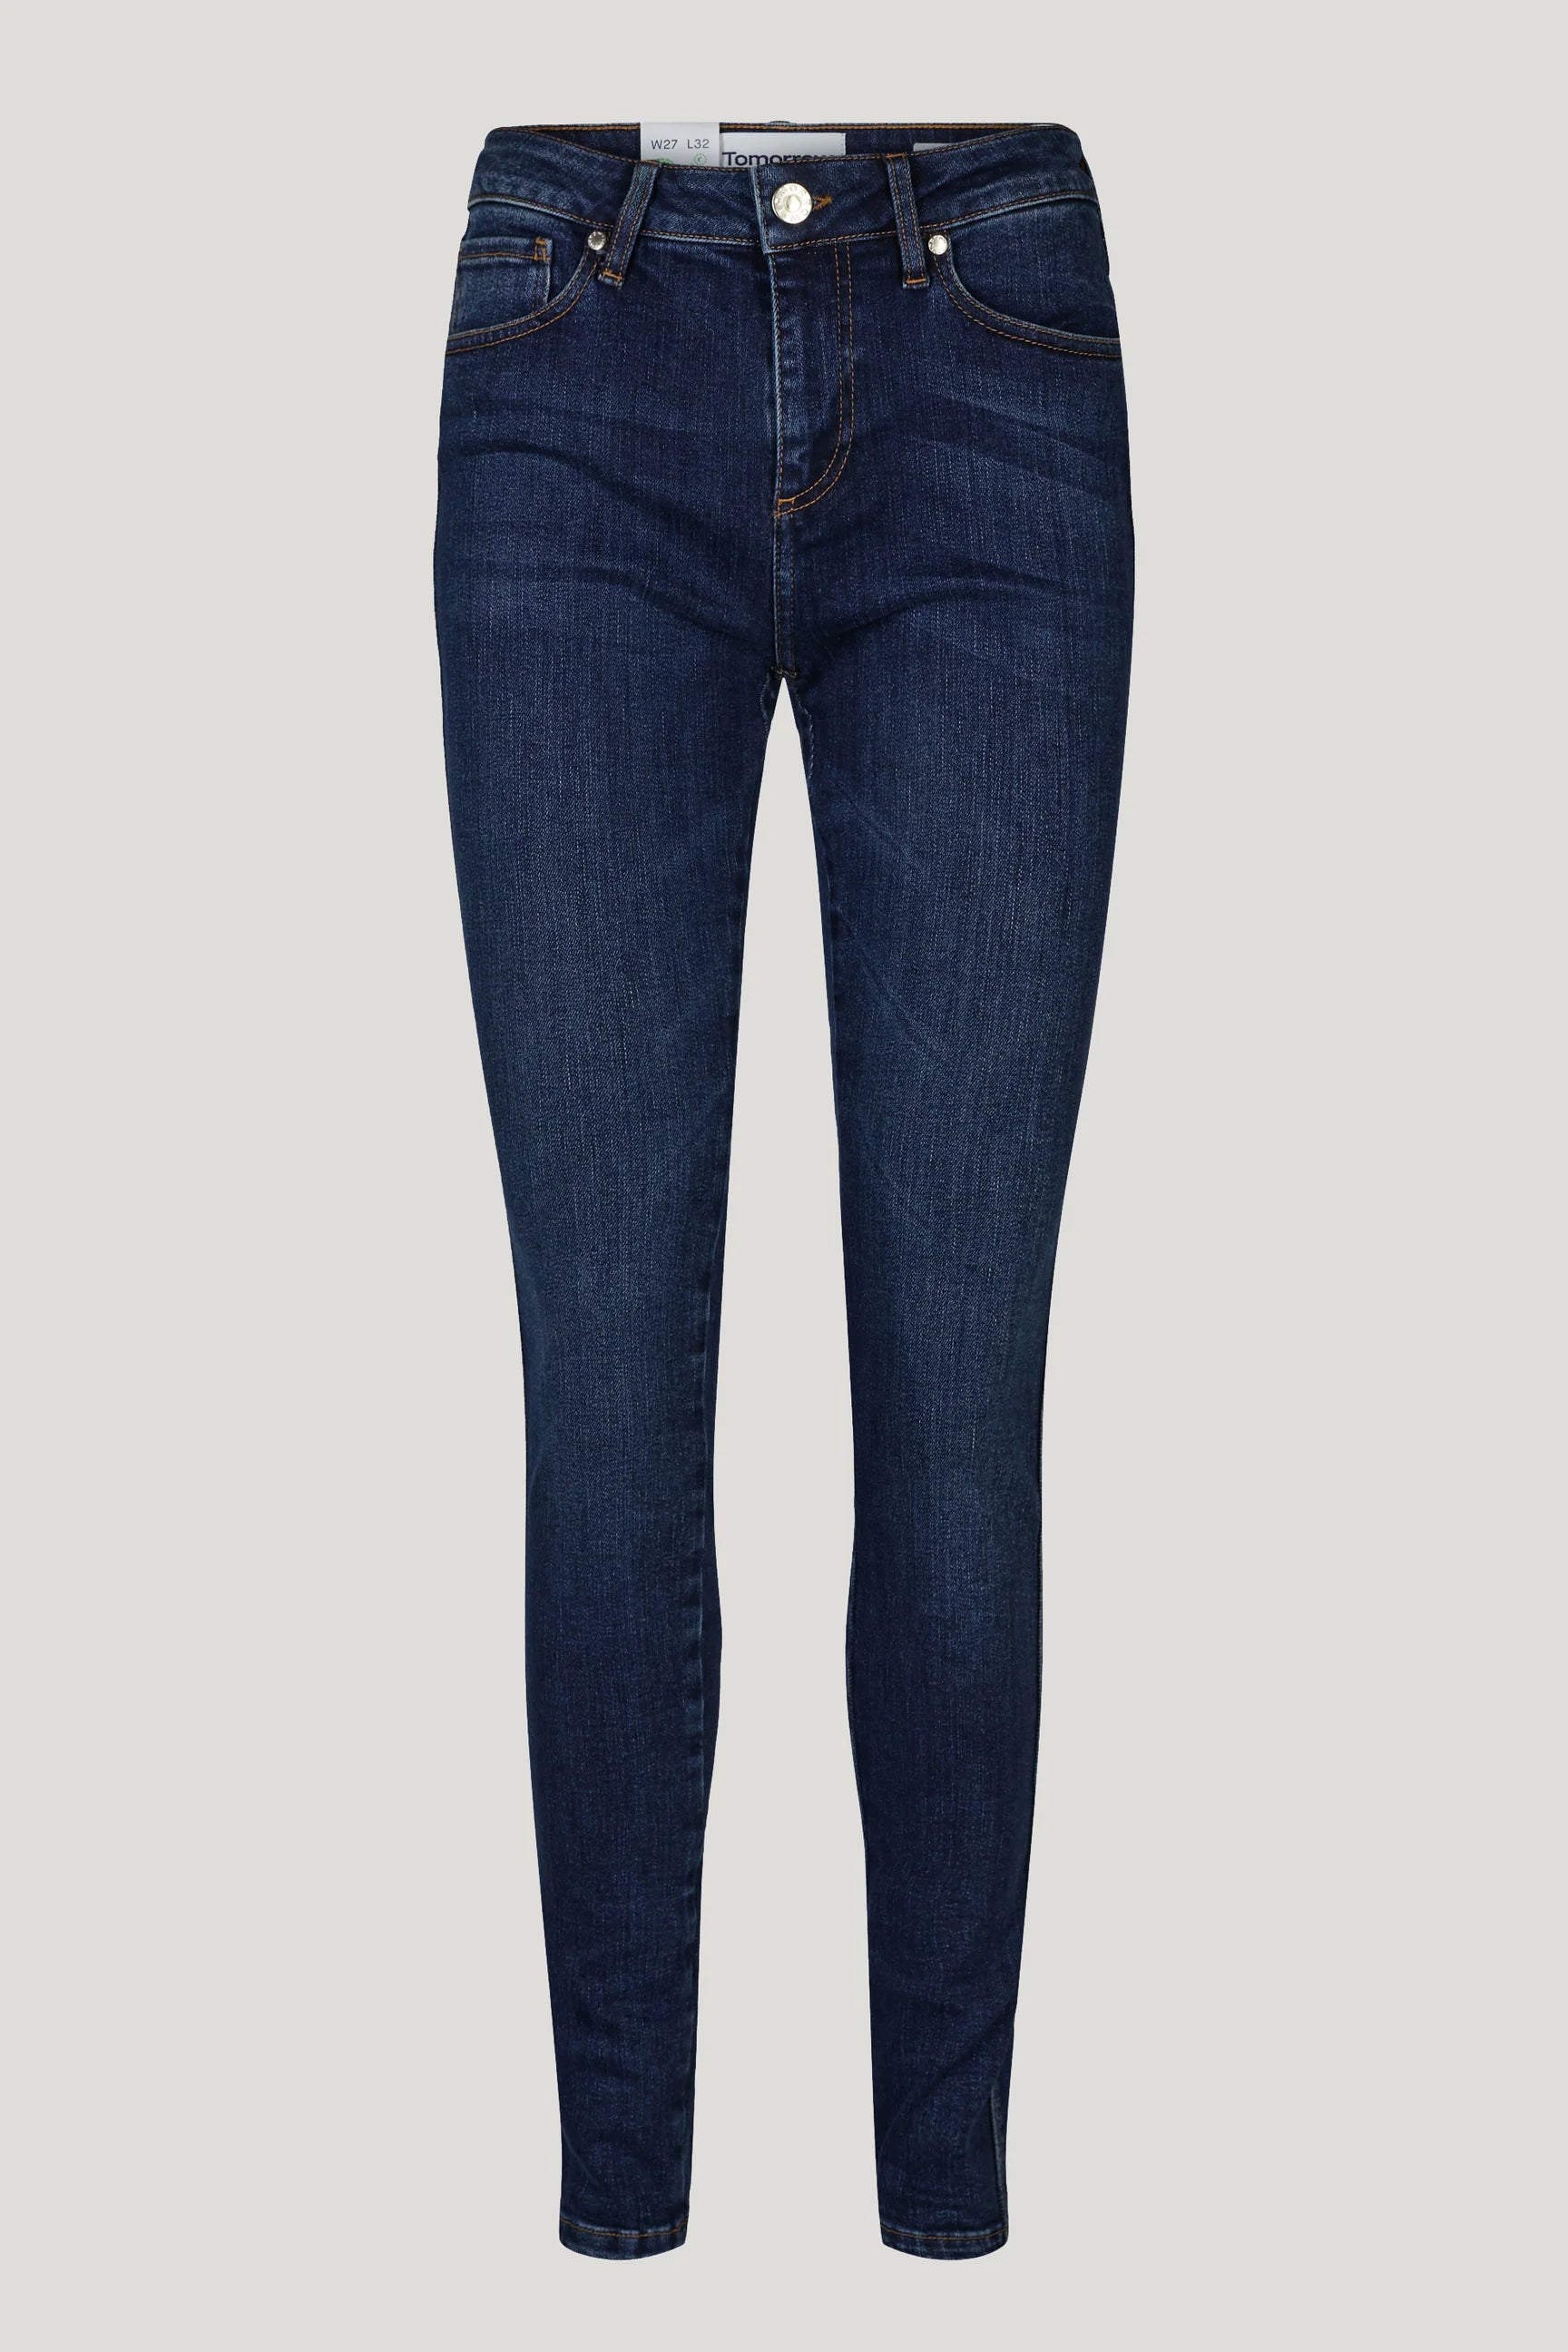 A woman's Dylan Mid Waist Jeans - Prato in dark blue denim made from organic cotton by Tomorrow Denim.